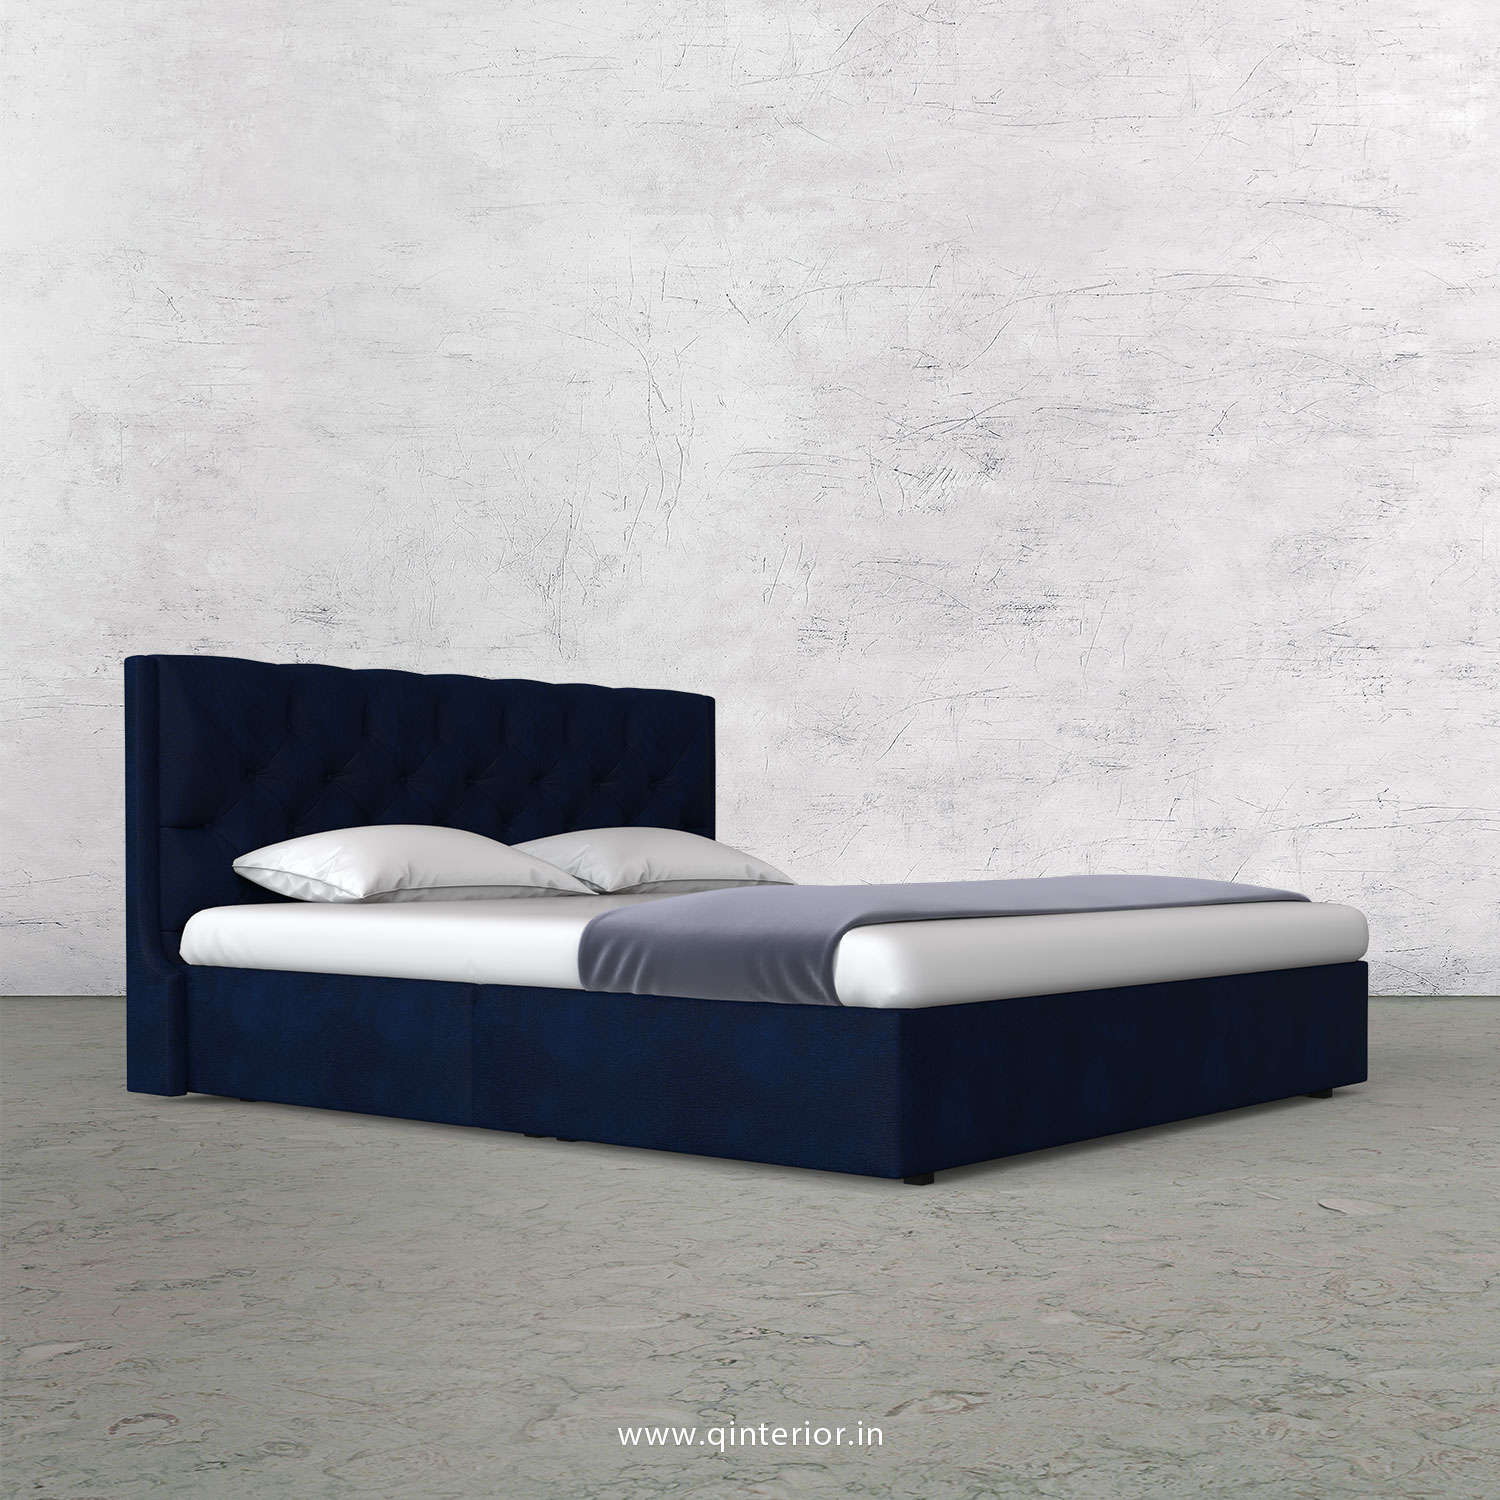 Scorpius Queen Bed in Fab Leather Fabric - QBD009 FL13